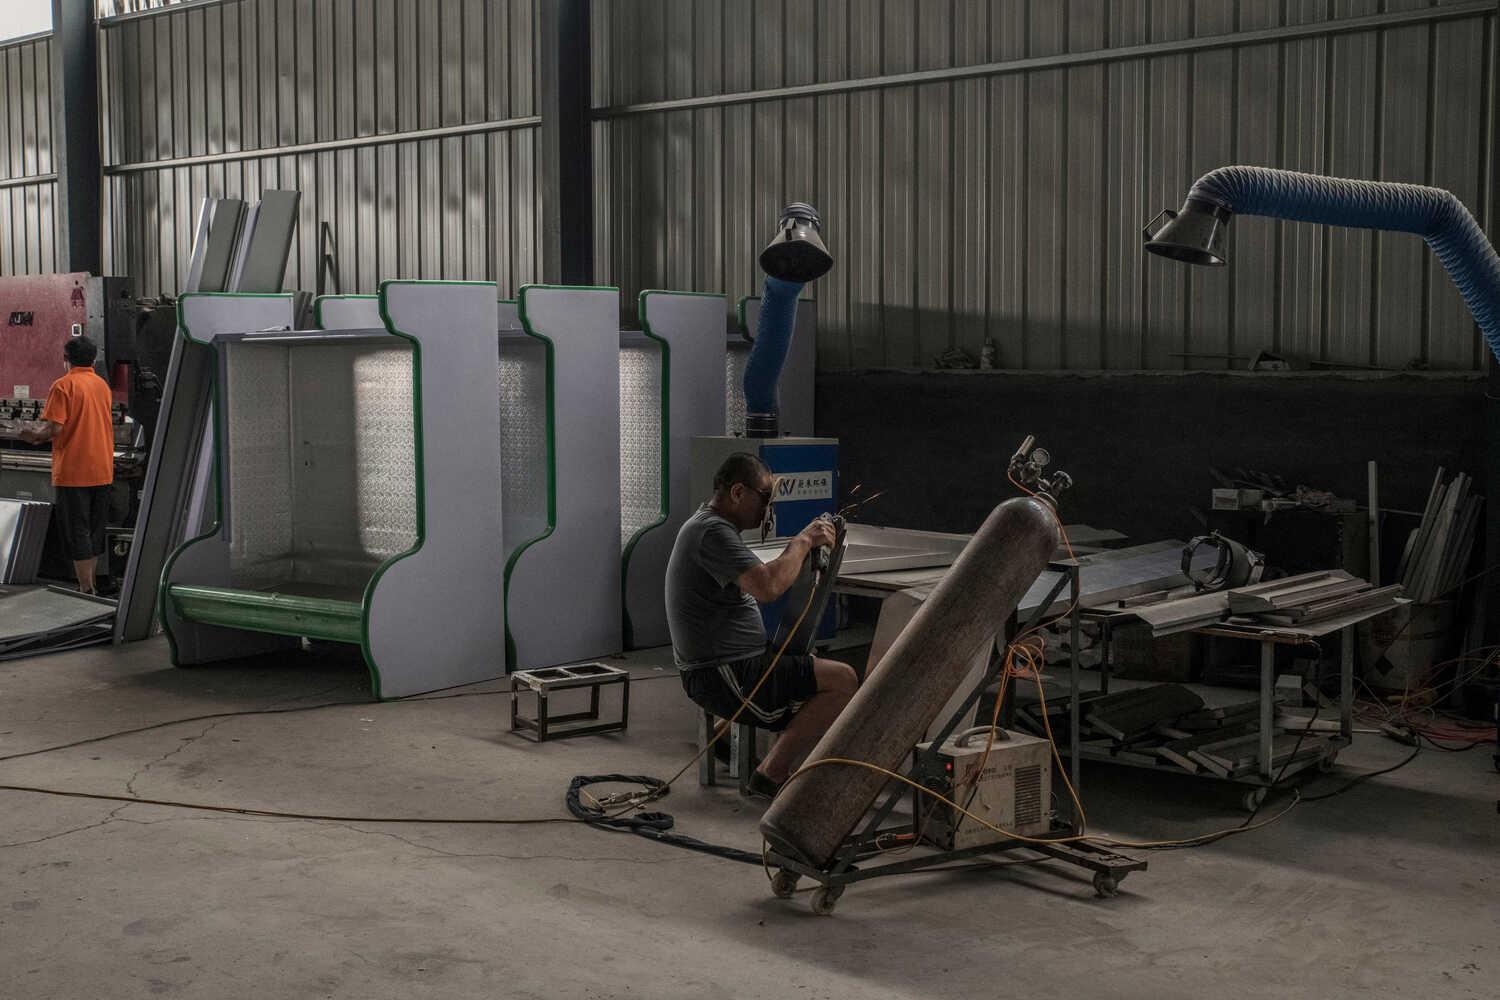 A factory floor that appears to be producing refrigerator cases for shops. At the center, a man with welding goggles sits at a bench adjusting a torch.